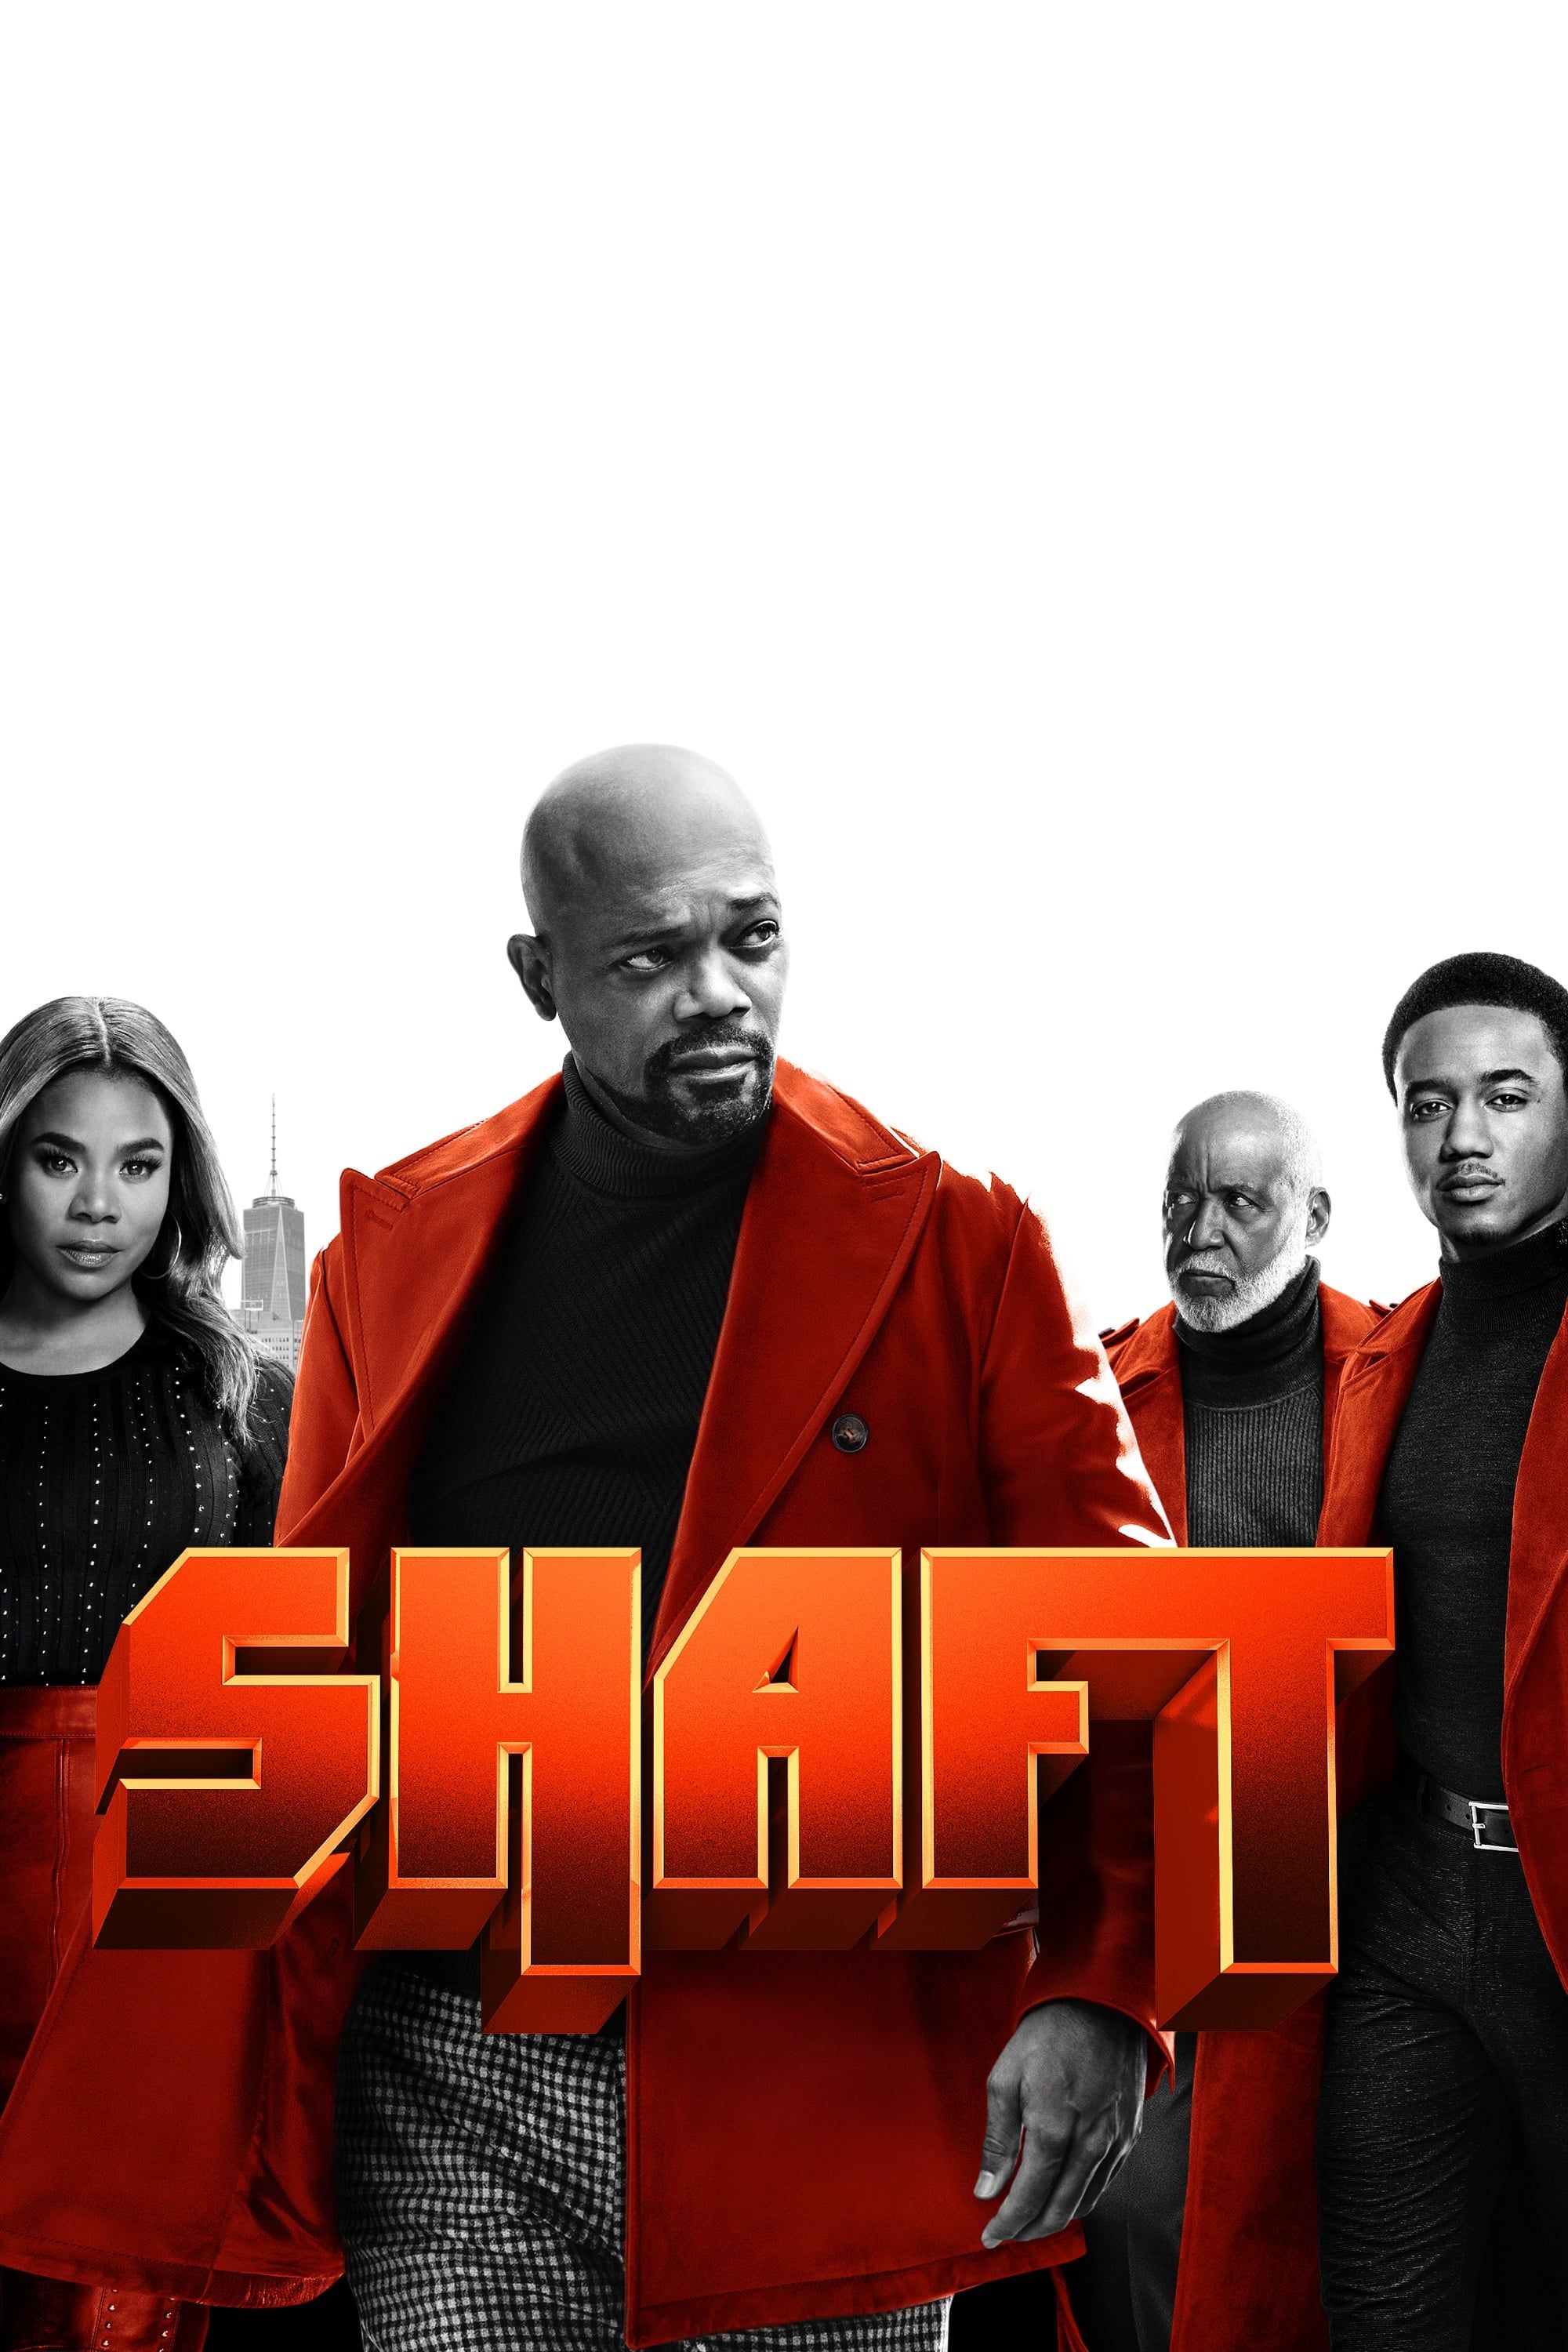 Son of Shaft